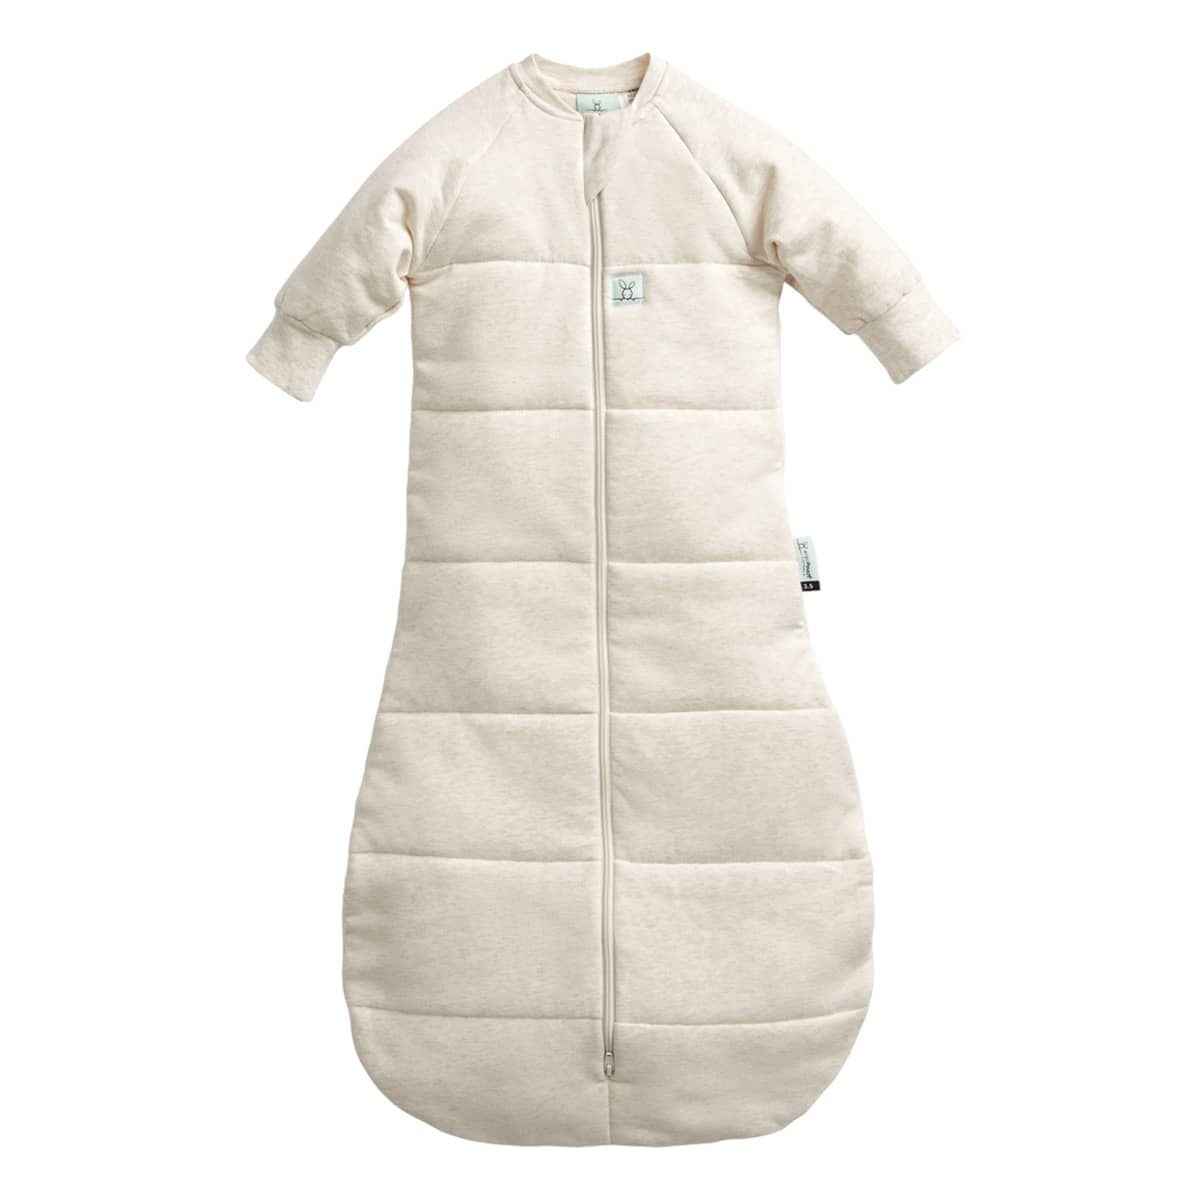 ergoPouch Jersey Sleeping Bag 3.5 TOG with Sleeves - Oatmeal Marle - 8 to 24 Months